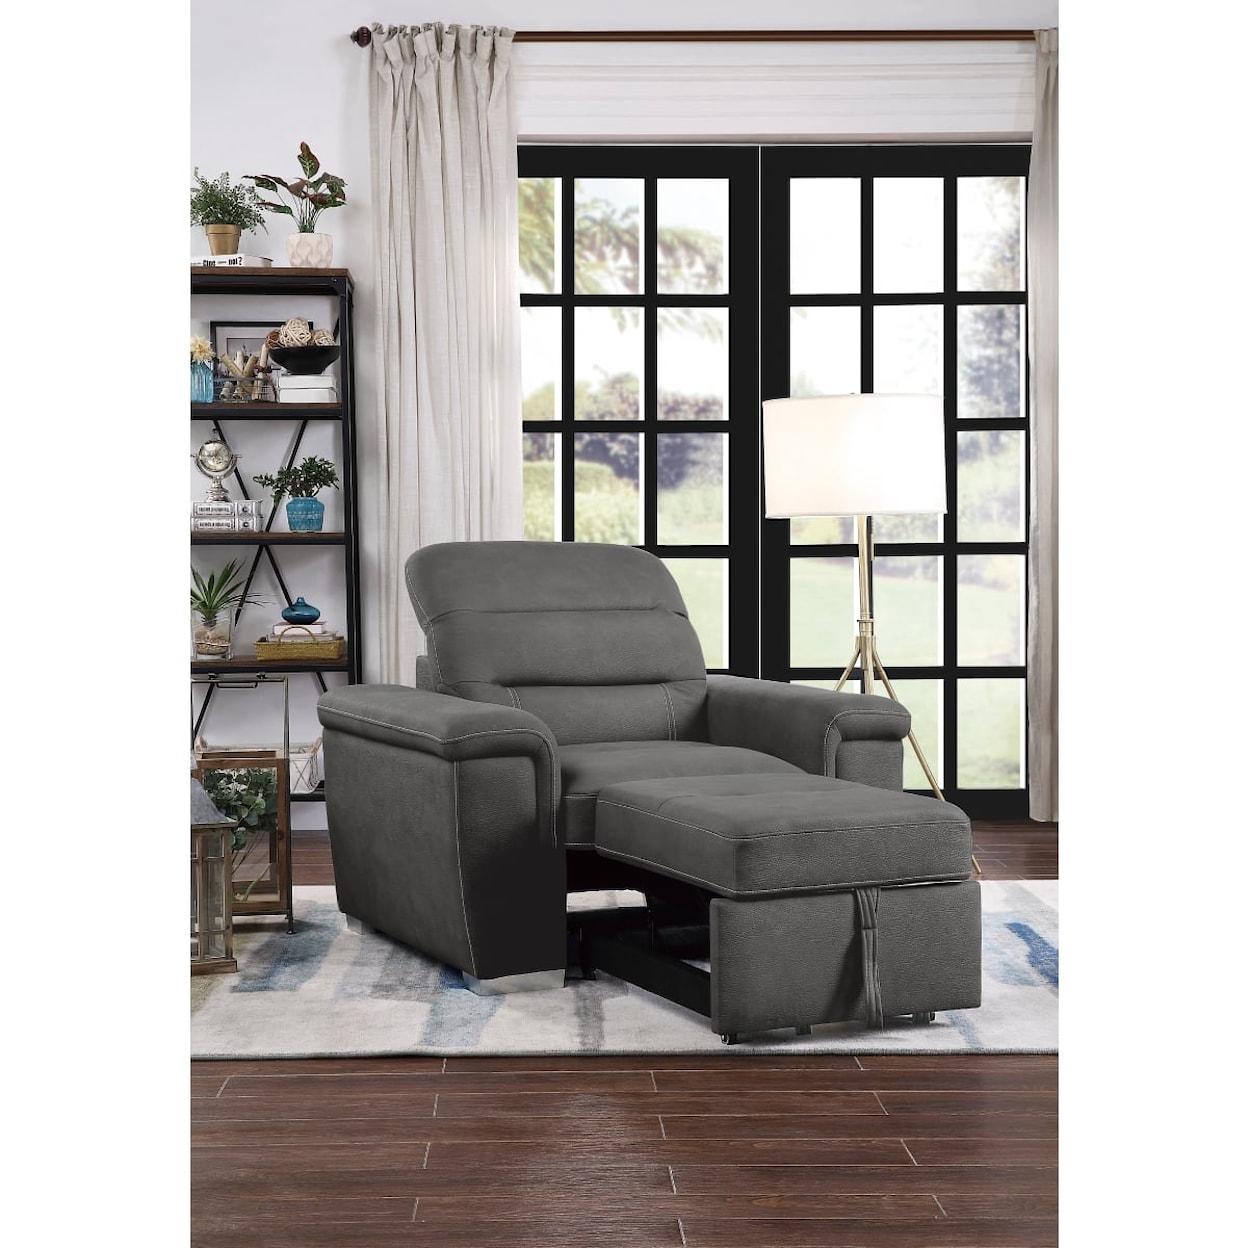 Homelegance Alfio Chair with Pull-out Ottoman